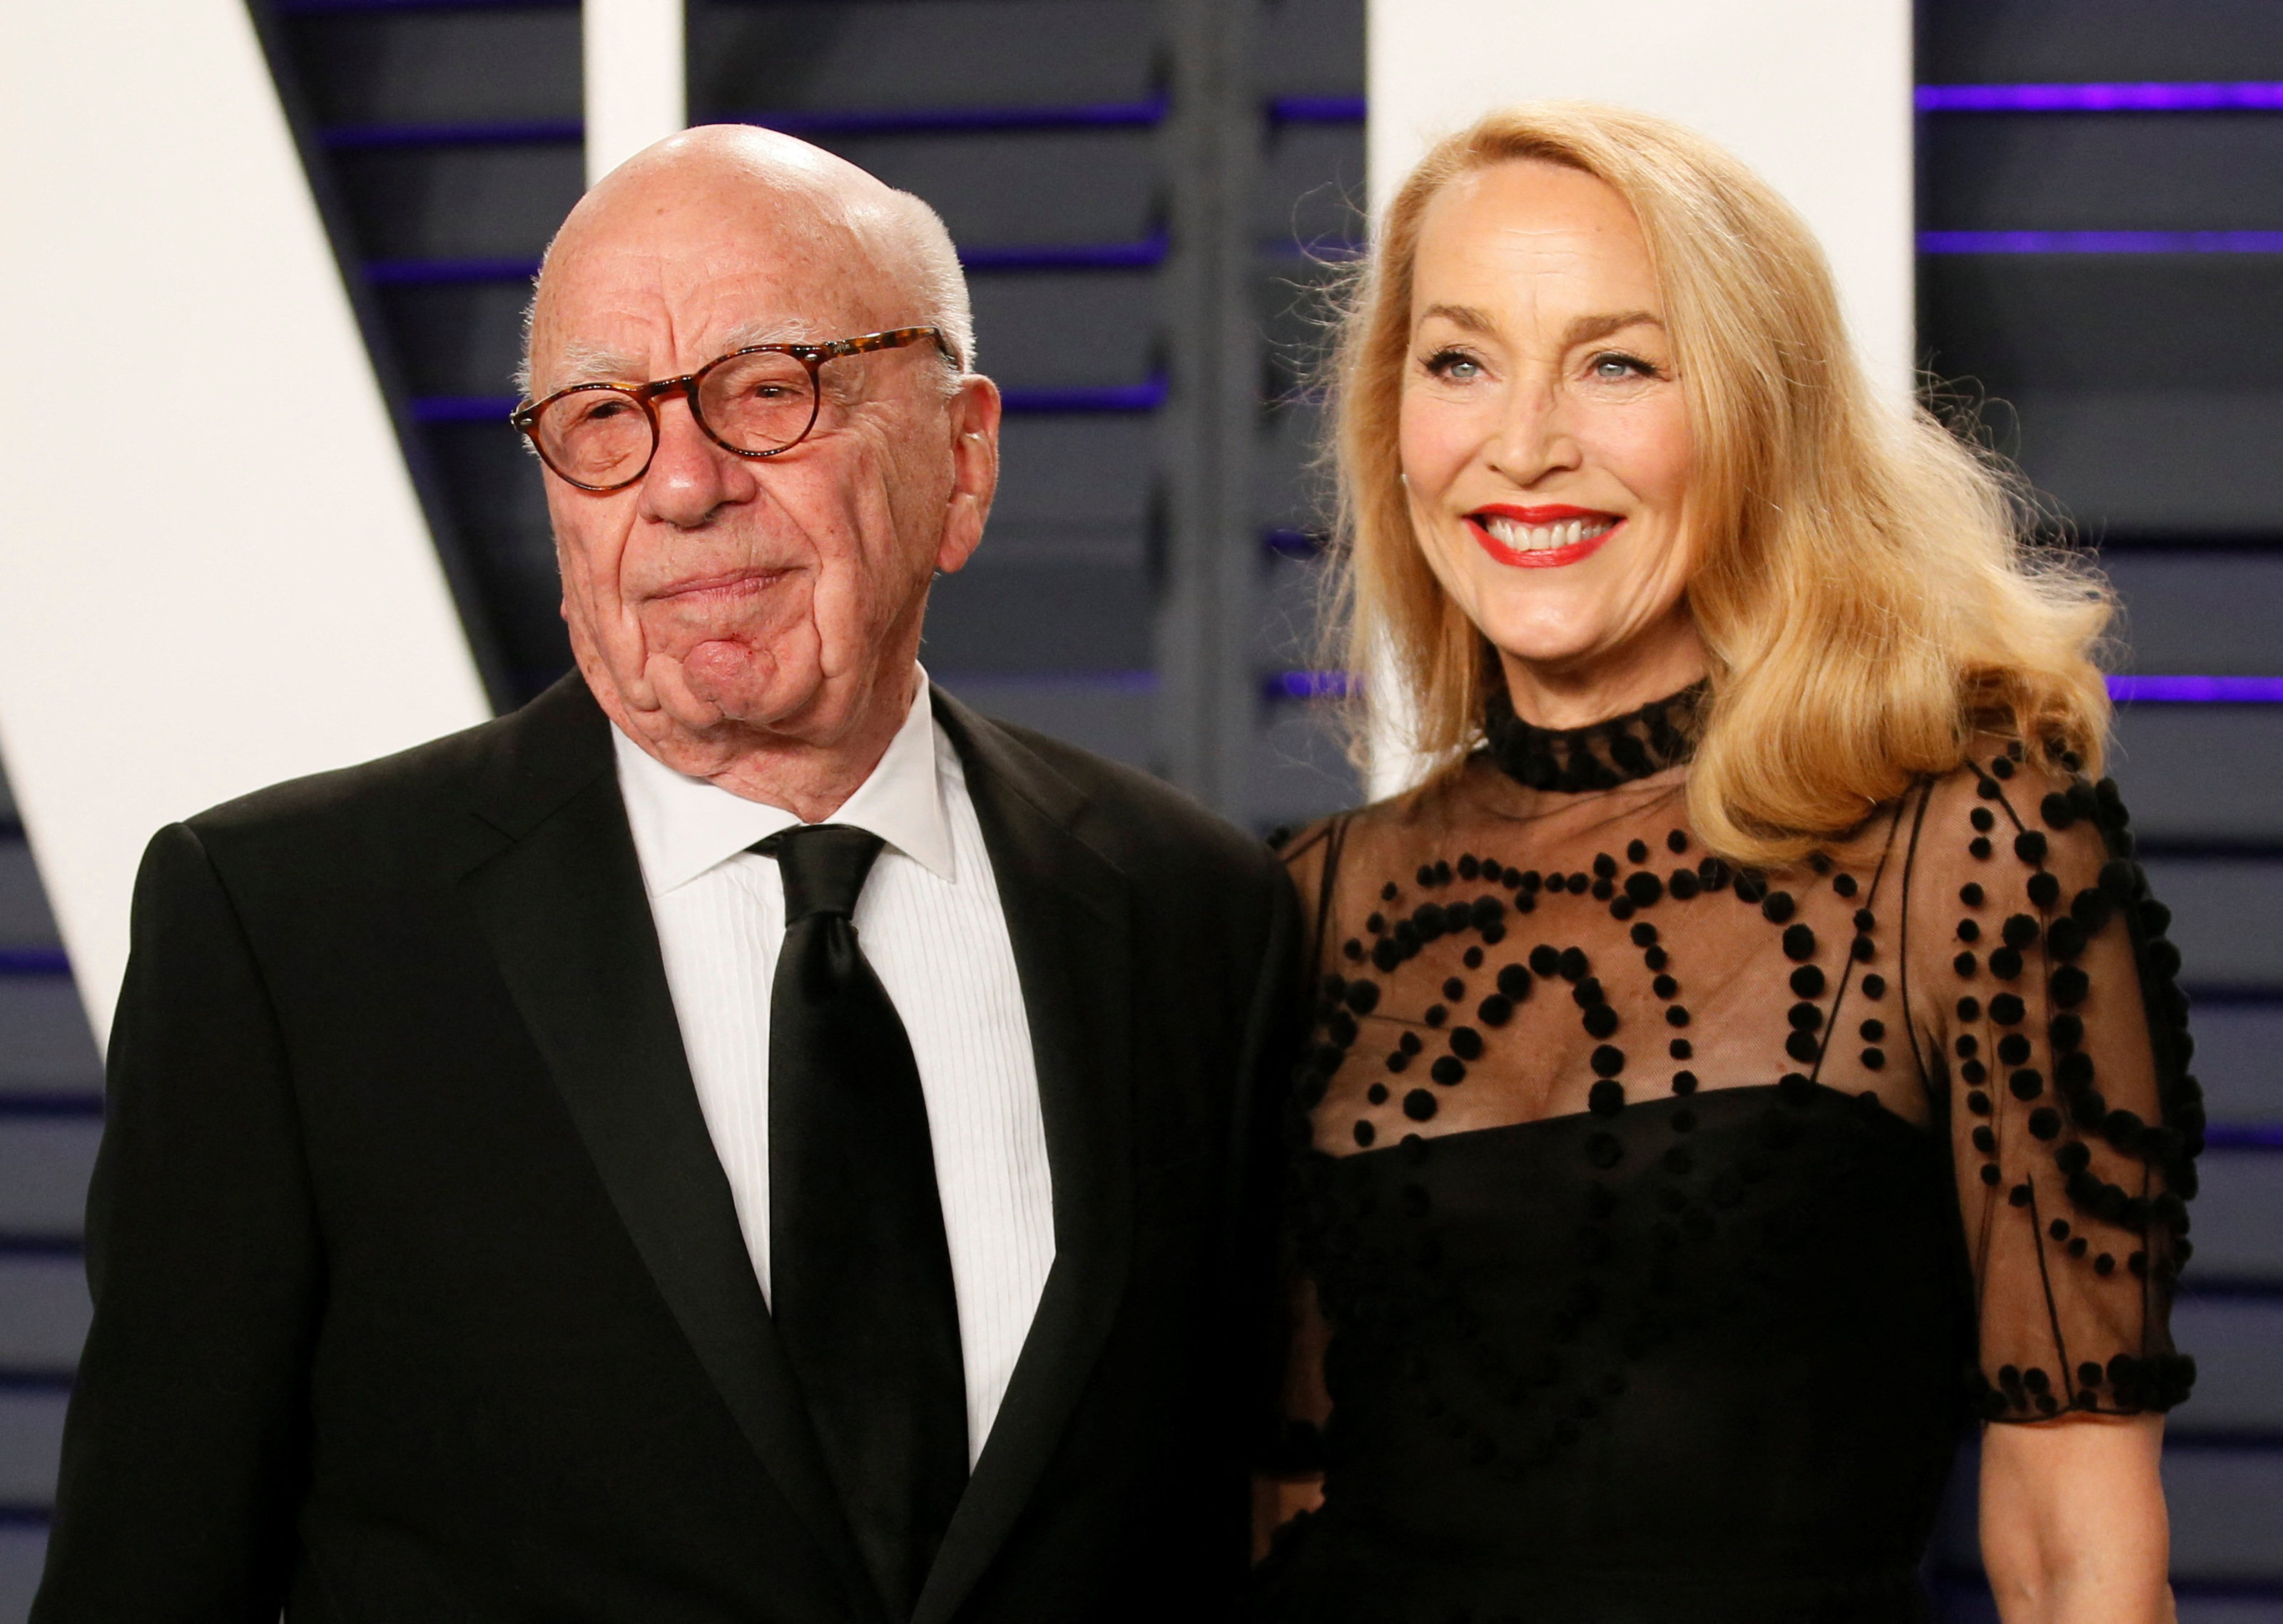 Rupert Murdoch and Jerry Hall are seen at the Academy Awards in Beverly Hills in February 2019. Photo: Reuters